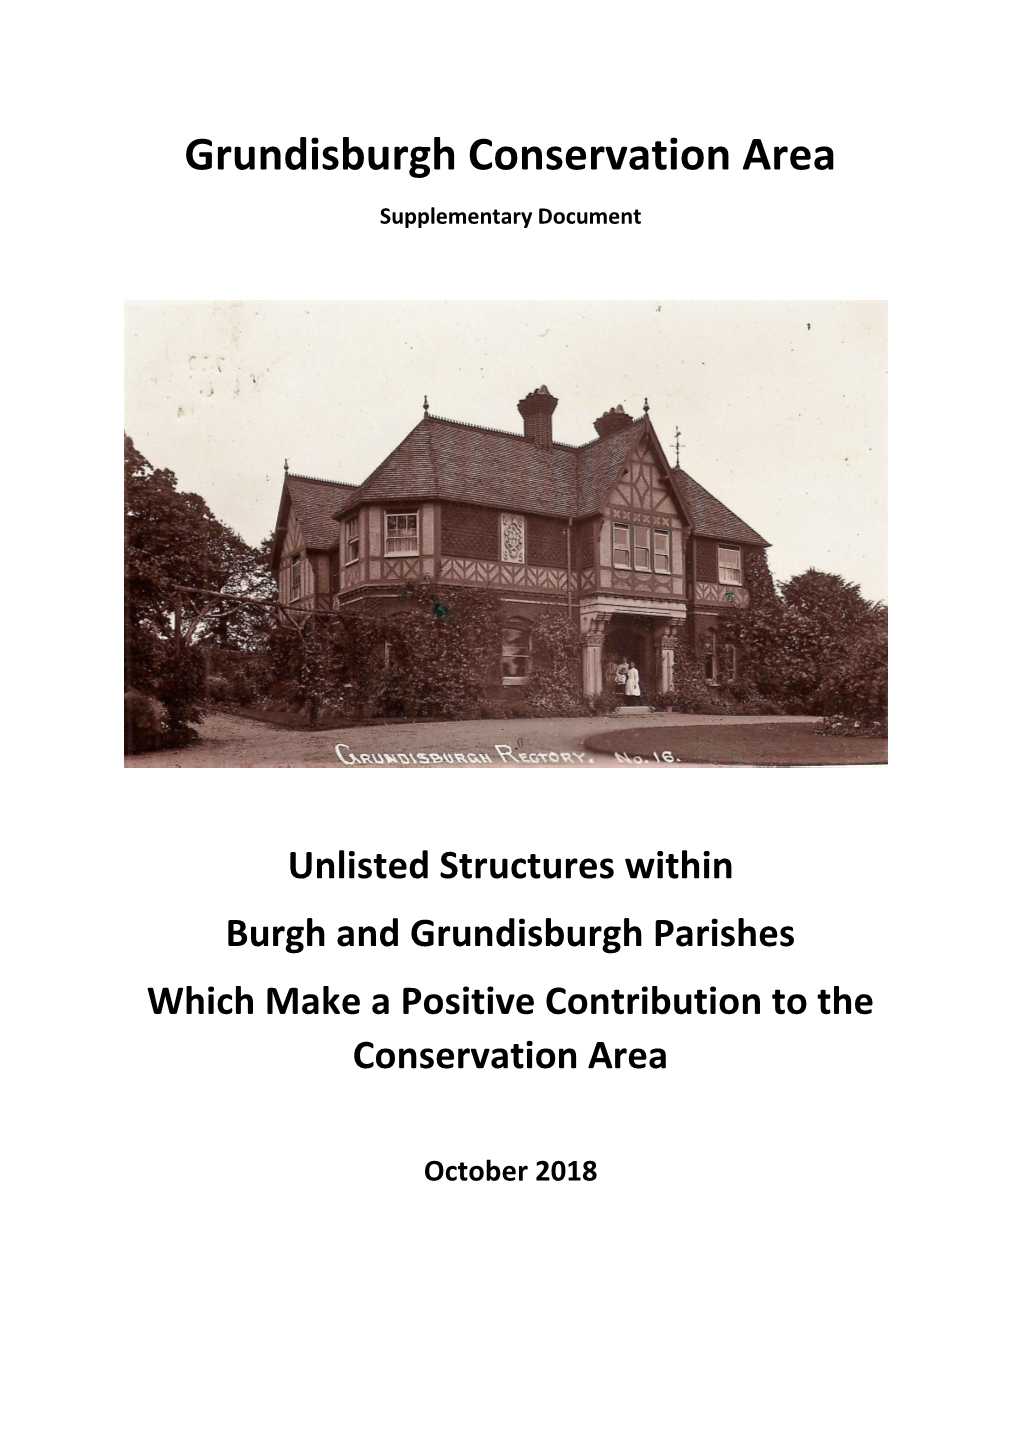 Unlisted Structures Within Burgh and Grundisburgh Parishes Which Make a Positive Contribution to the Conservation Area